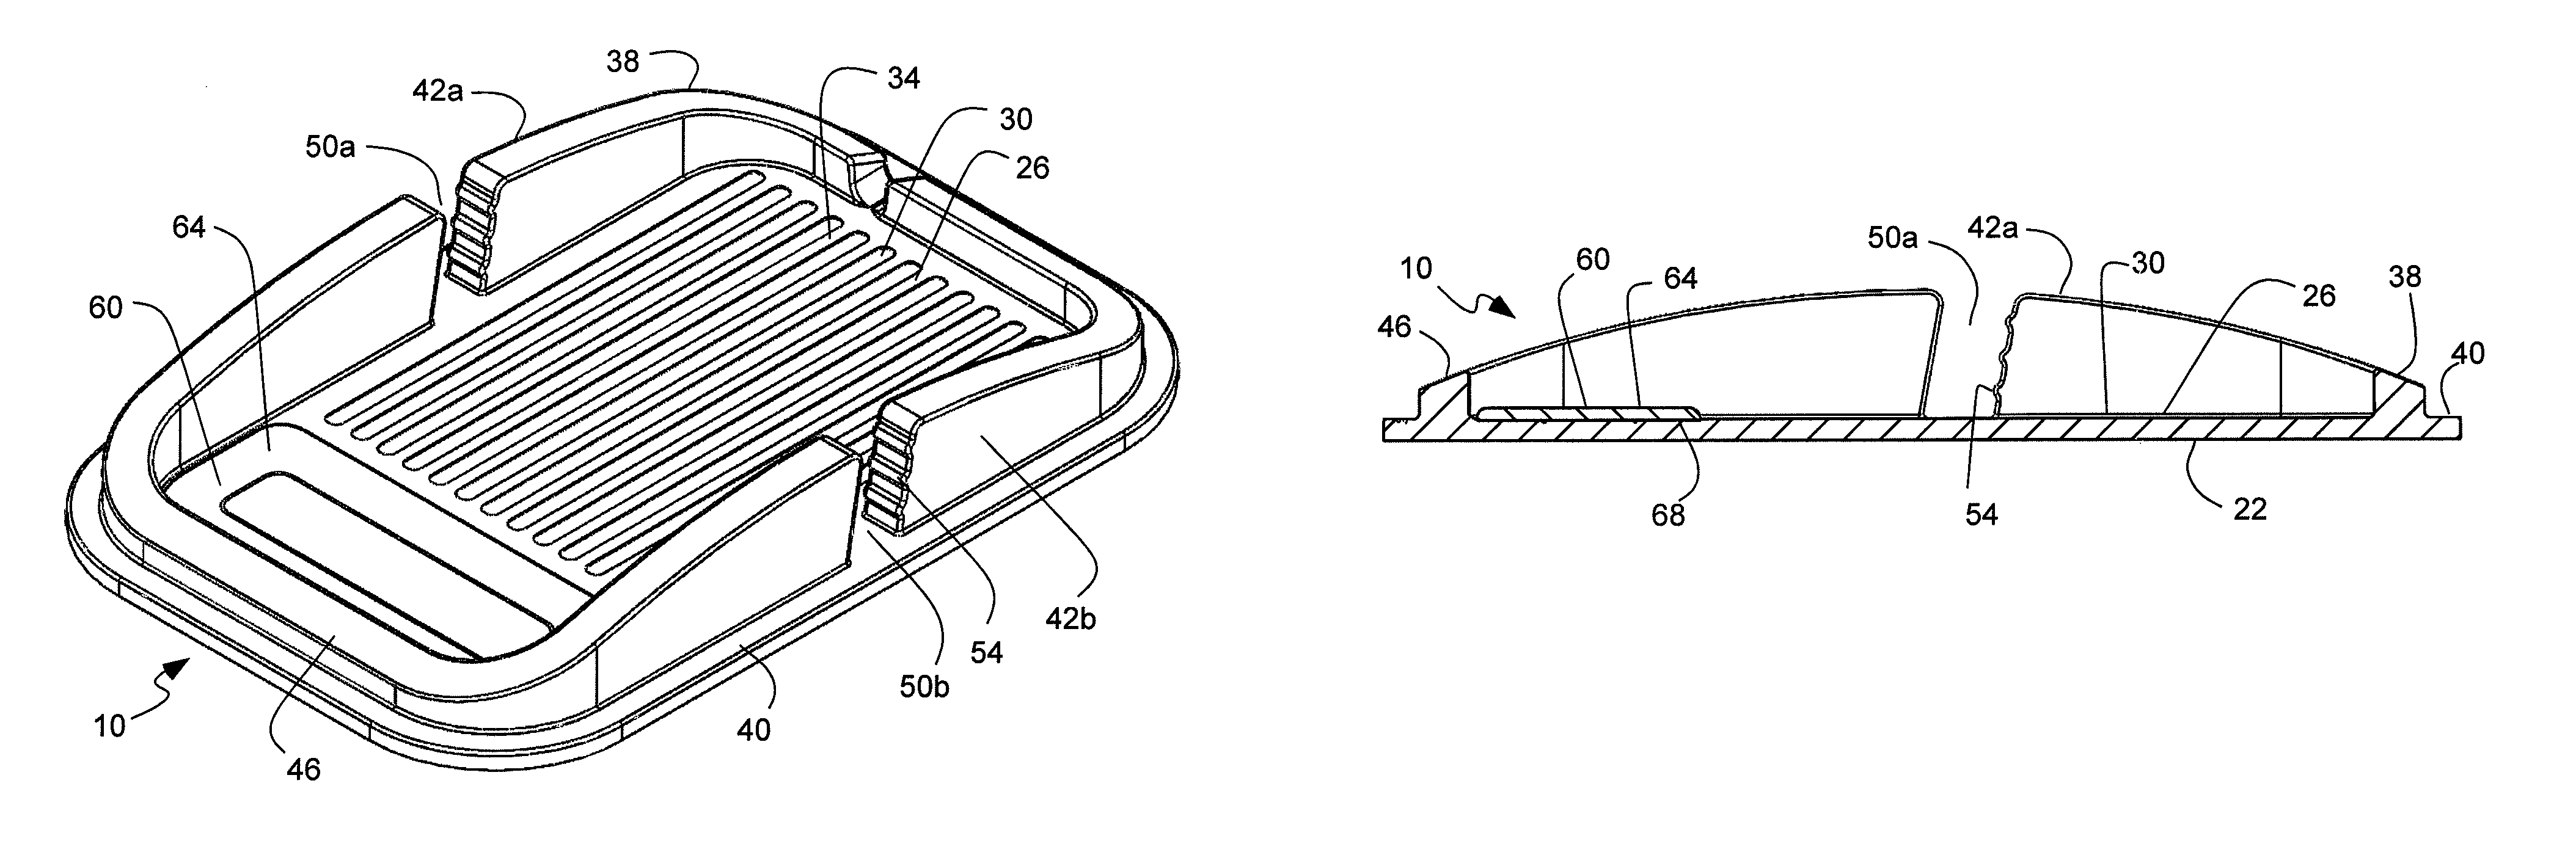 Frictional holding pad with inclined grip